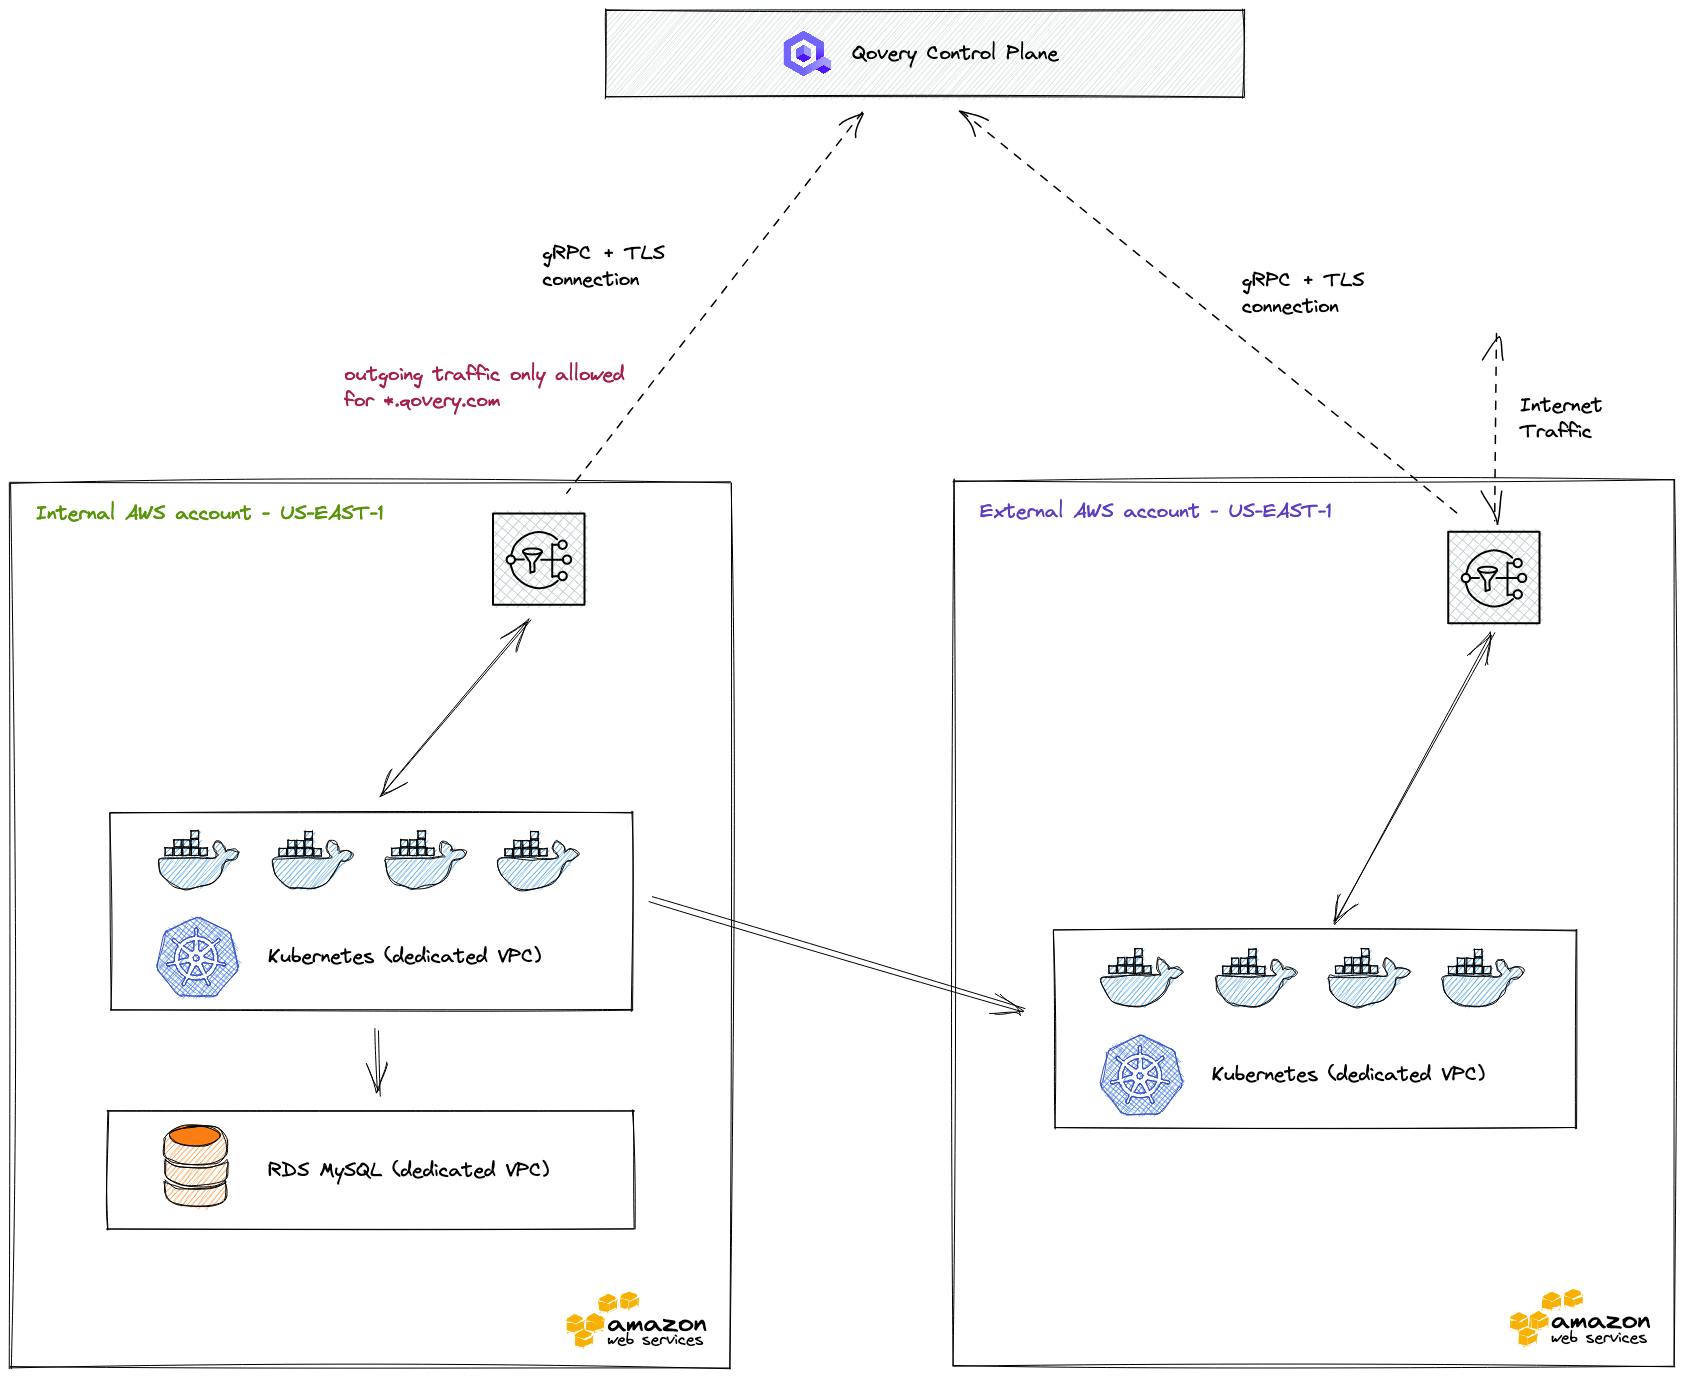 The DMZ with an internal and external VPCs and AWS accounts